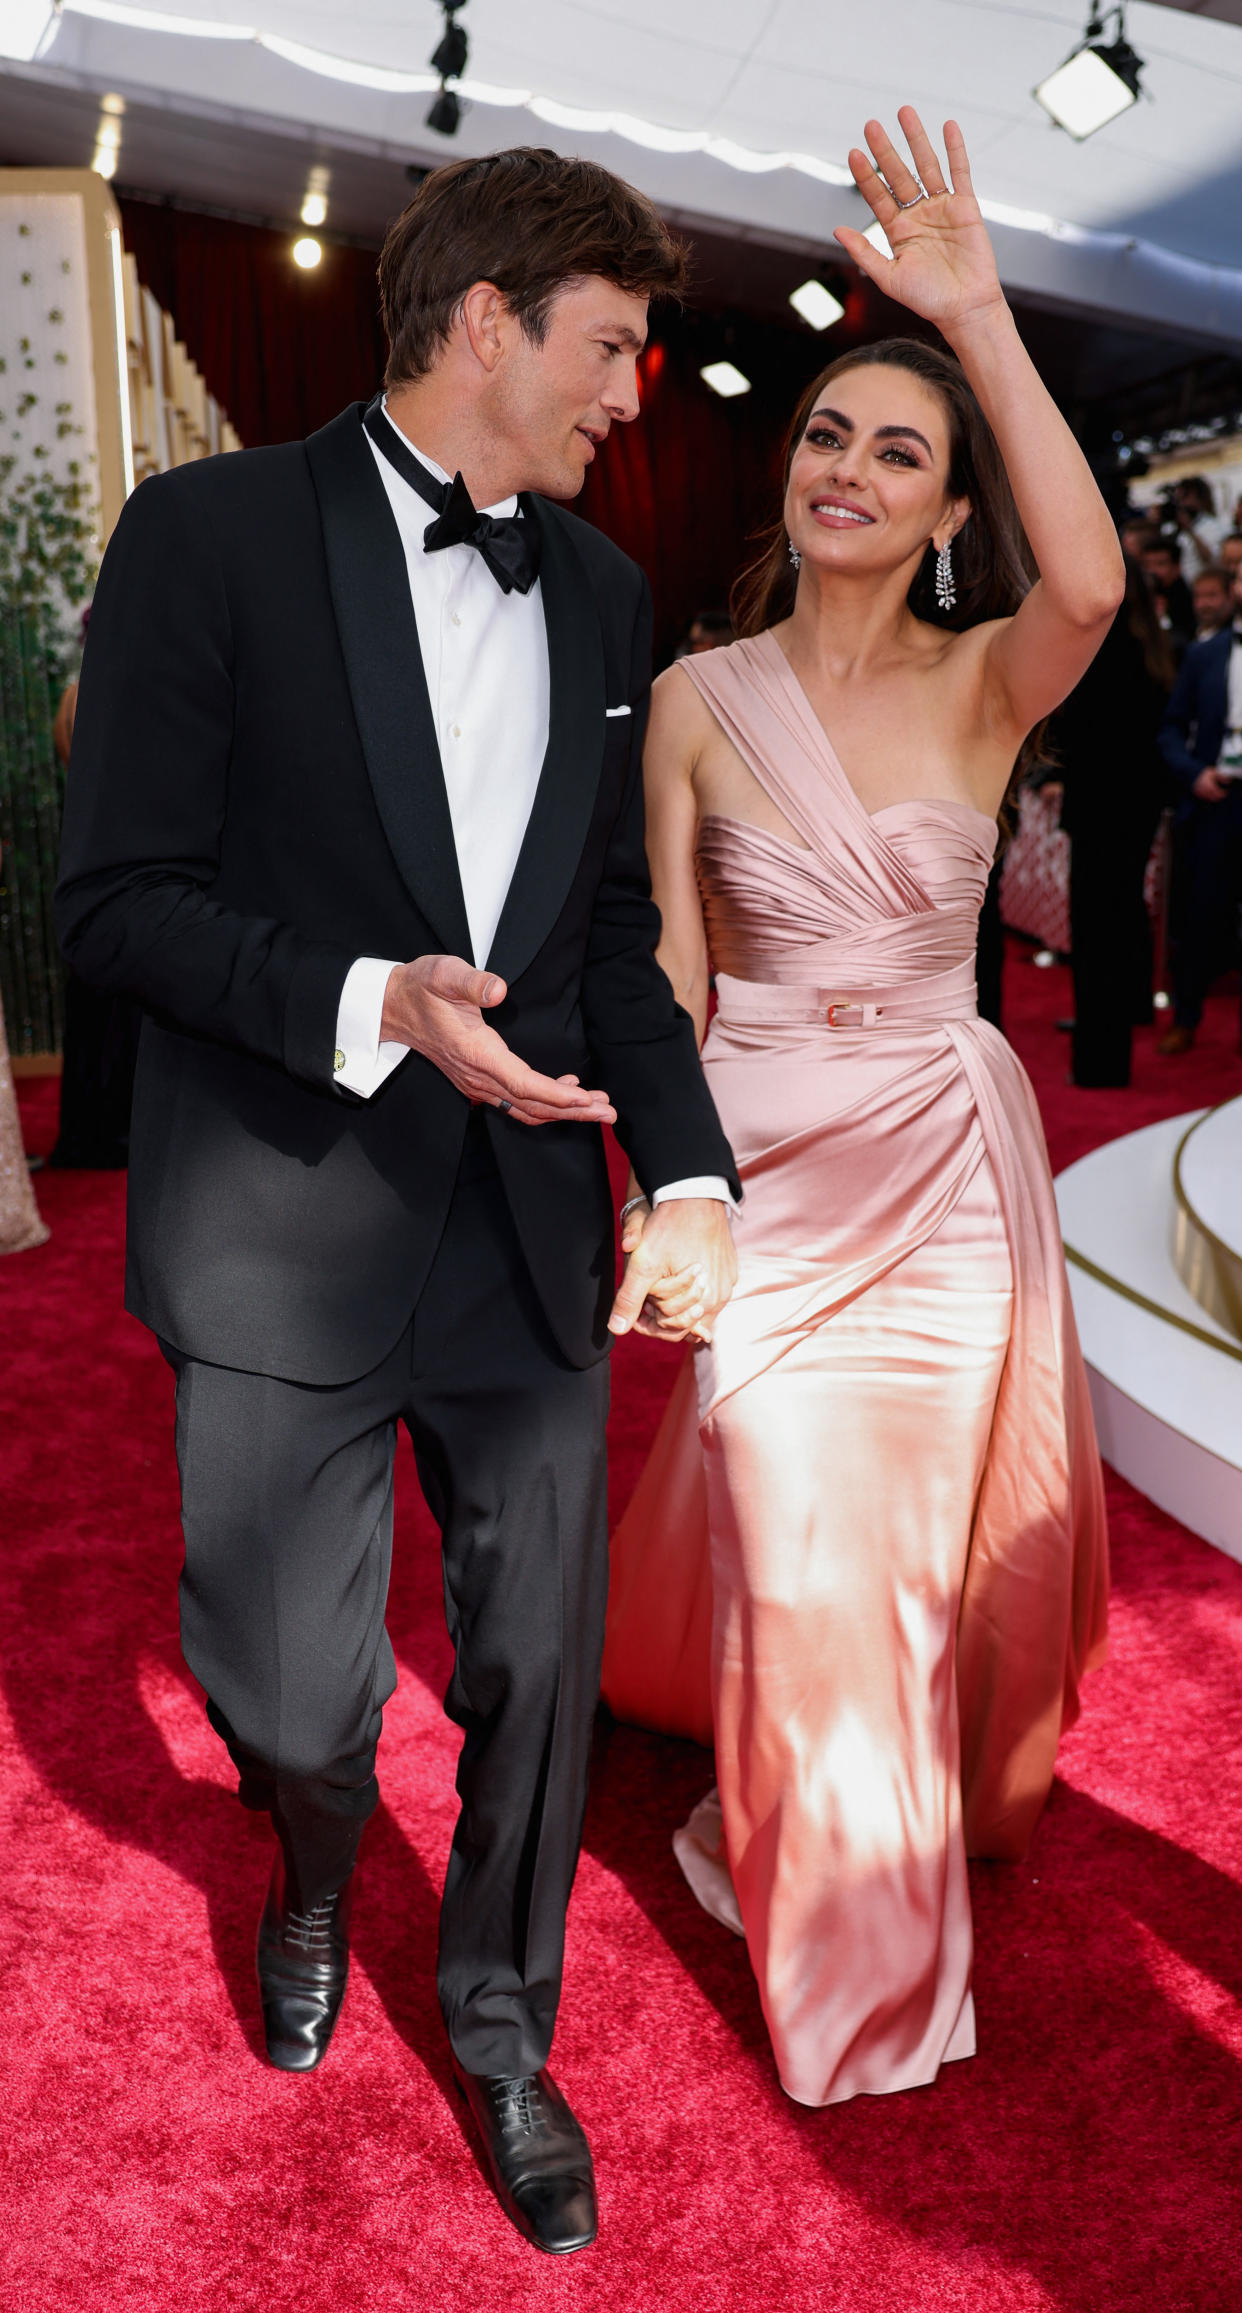 Ashton Kutcher and Mila Kunis pose on the red carpet during the Oscars arrivals at the 94th Academy Awards in Hollywood, Los Angeles, California, U.S., March 27, 2022. REUTERS/Mike Blake